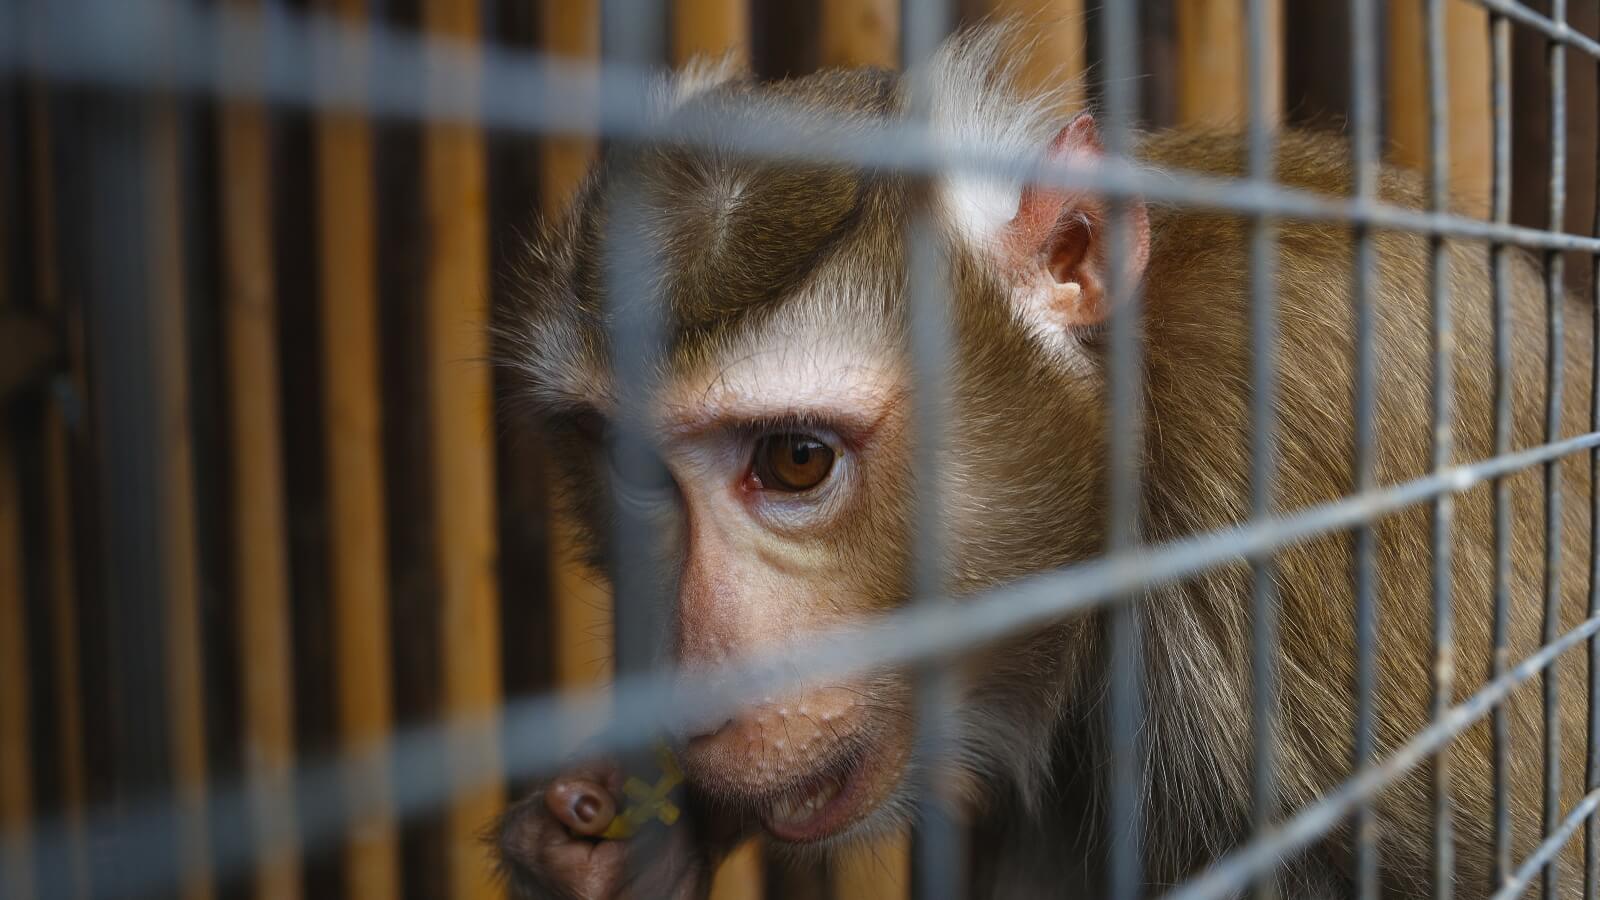 Millions Of Taxpayer Dollars Used To Fund ‘Revolting’ Experiments On Monkeys